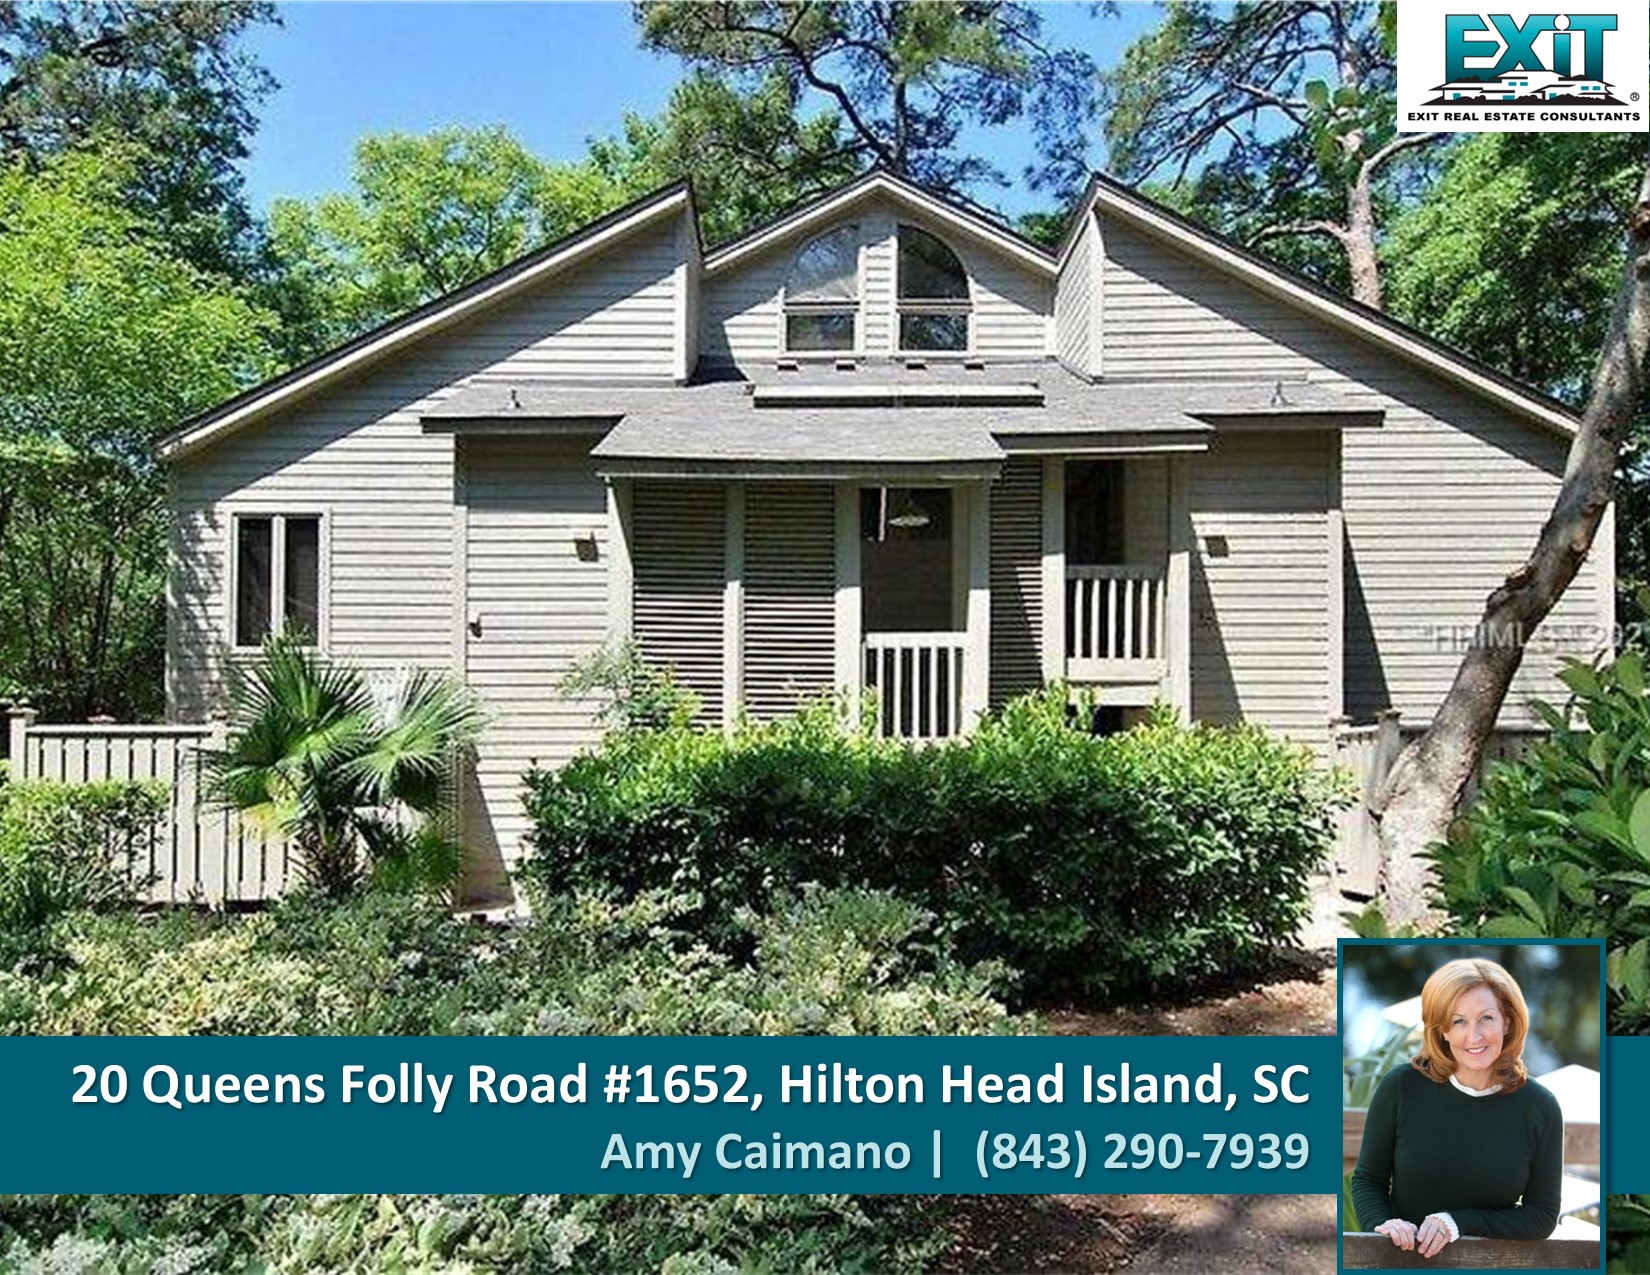 Just listed in Hilton Head Island